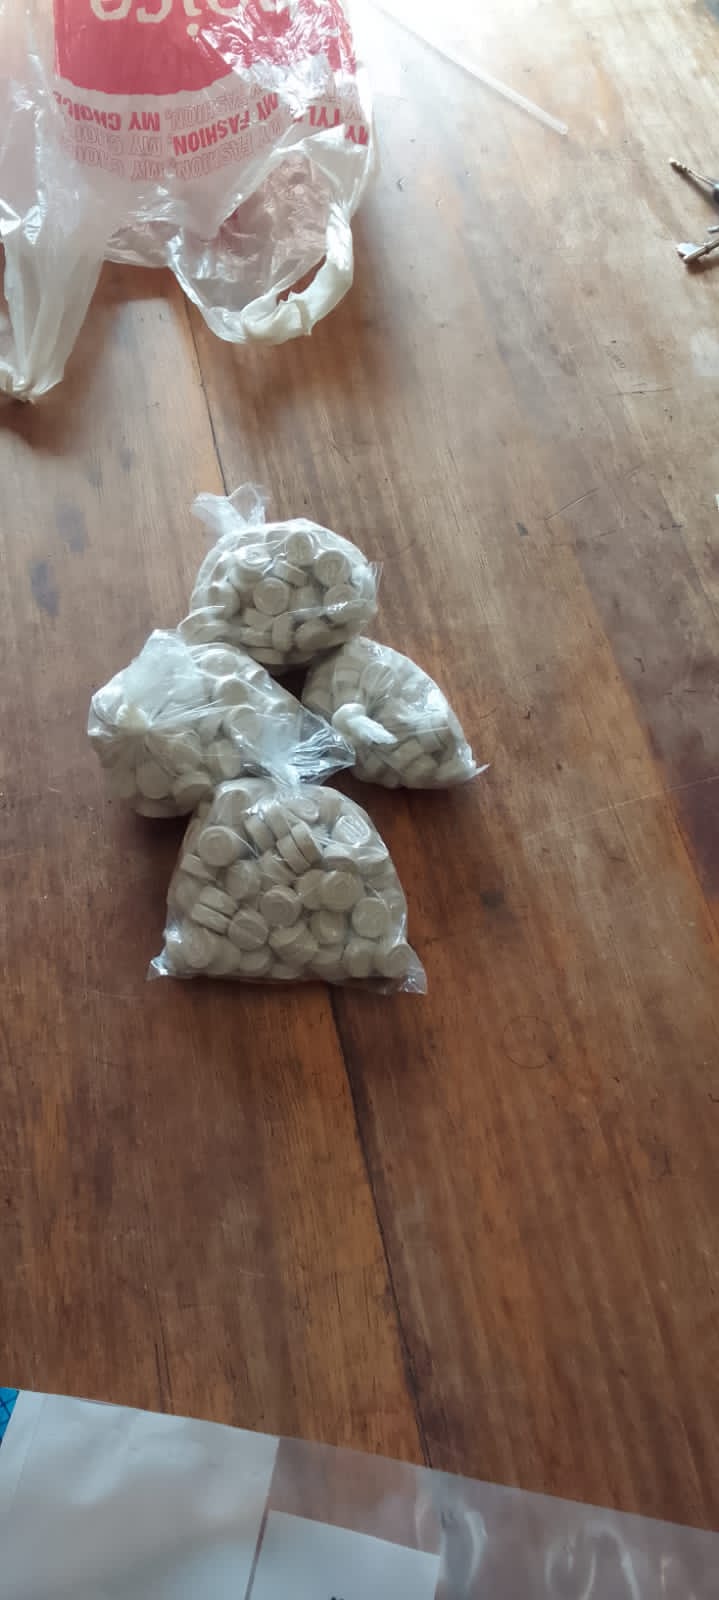 Grabouw Police arrest suspects with mandrax tablets